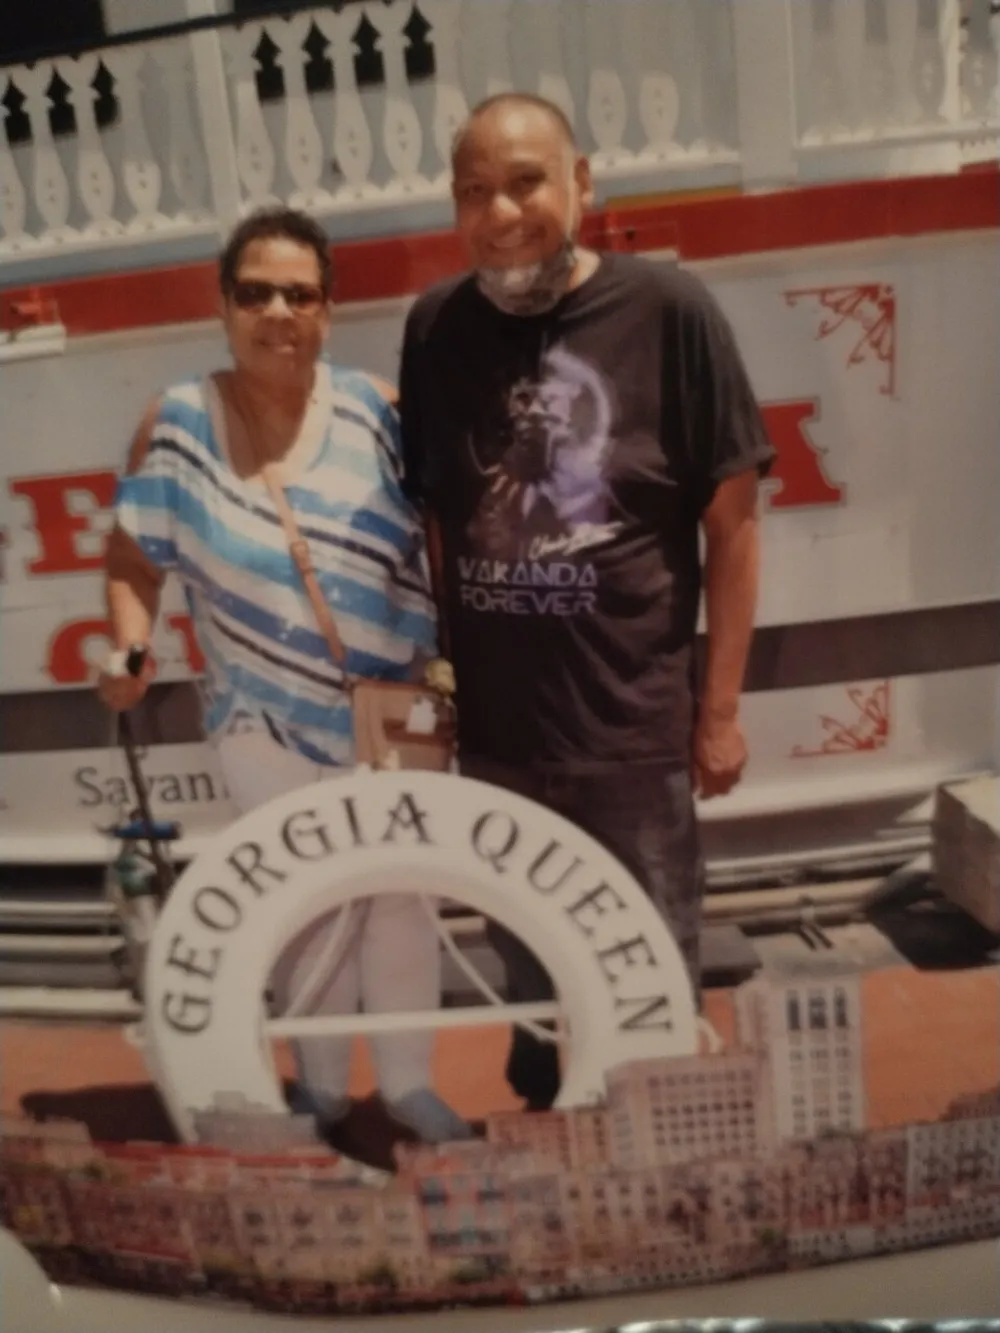 A smiling man wearing a Wakanda Forever t-shirt and a woman in a striped top are posing in front of a lifebuoy labeled GEORGIA QUEEN likely taken on a riverboat or at a waterfront attraction